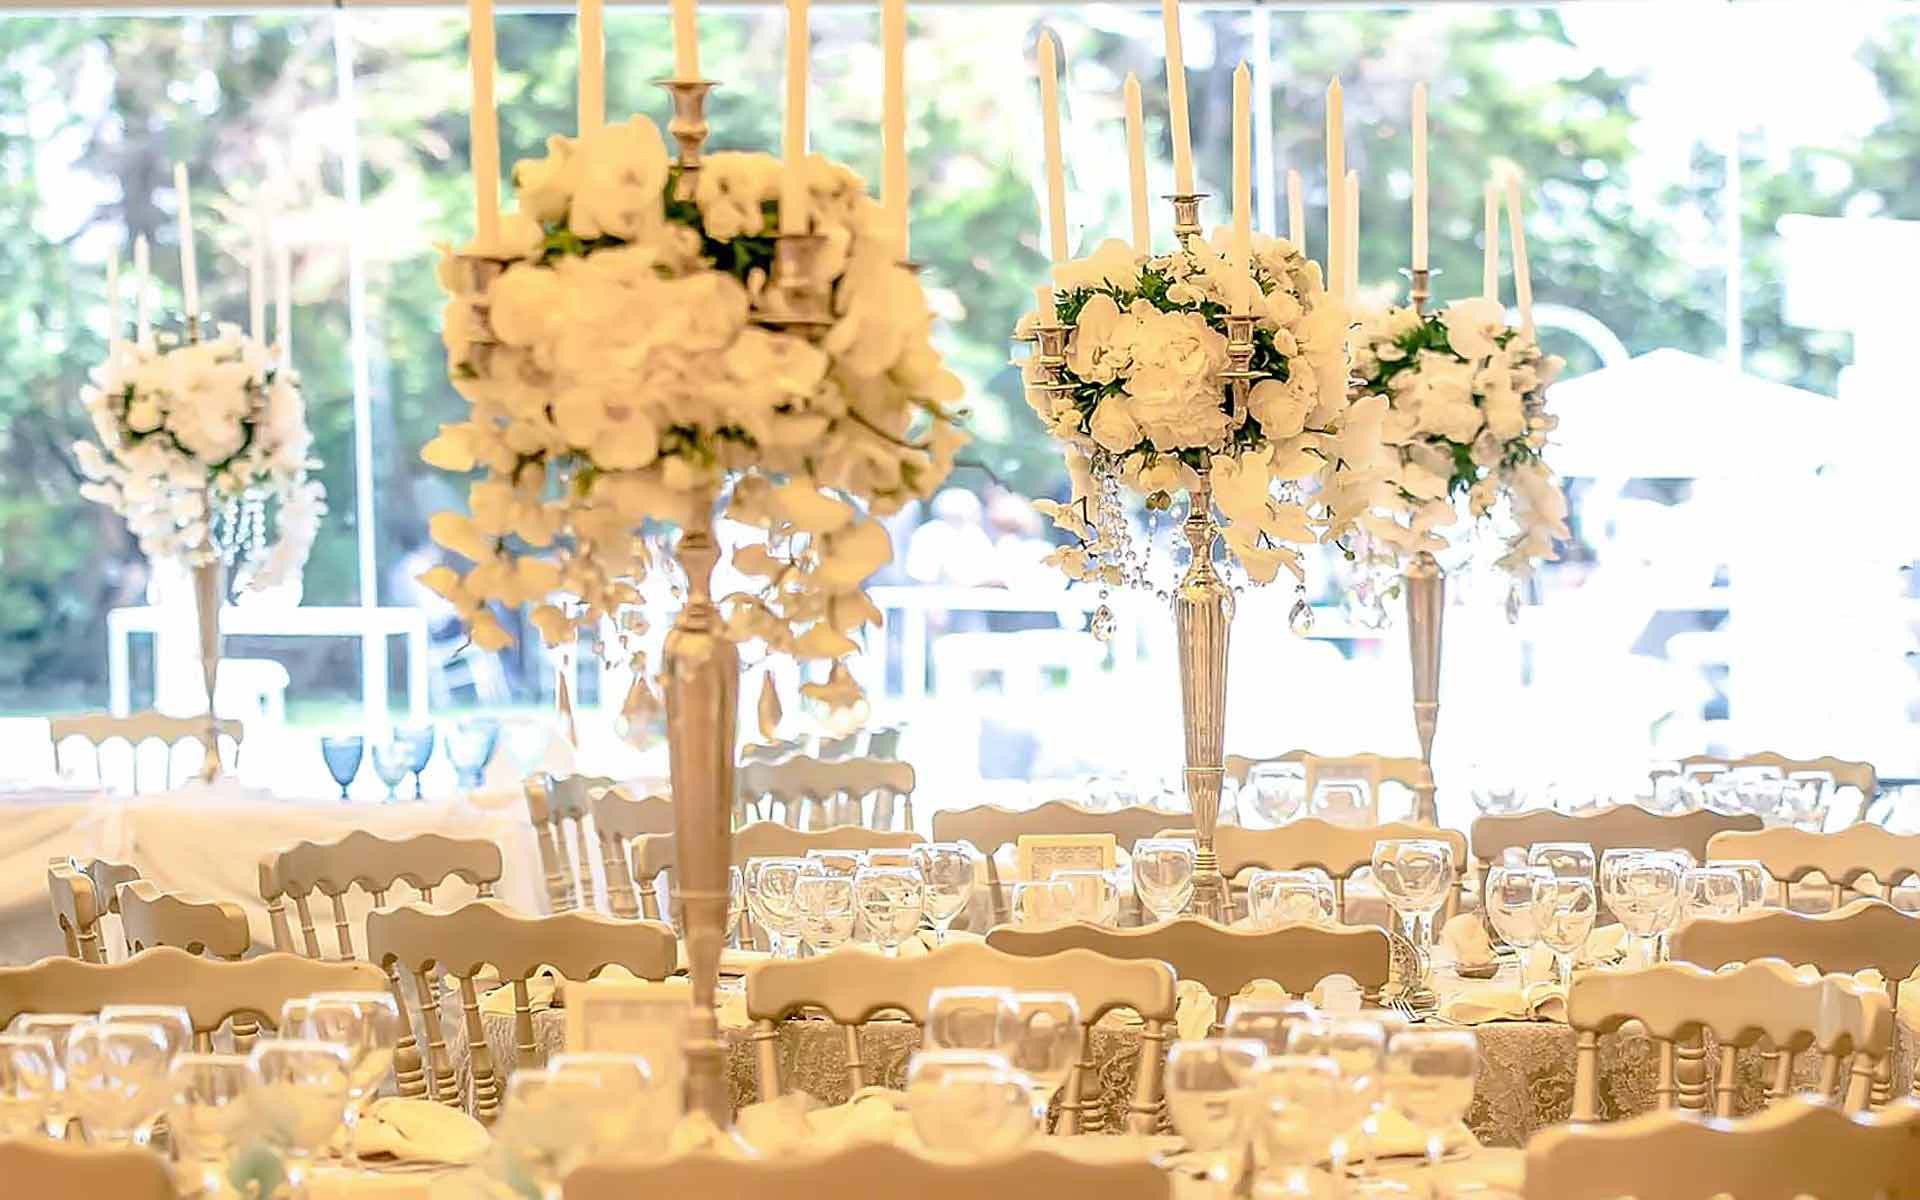 Extravagant Dream Wedding Silver candelabras with crystals and white orchids by Rogdaki Events Trademark